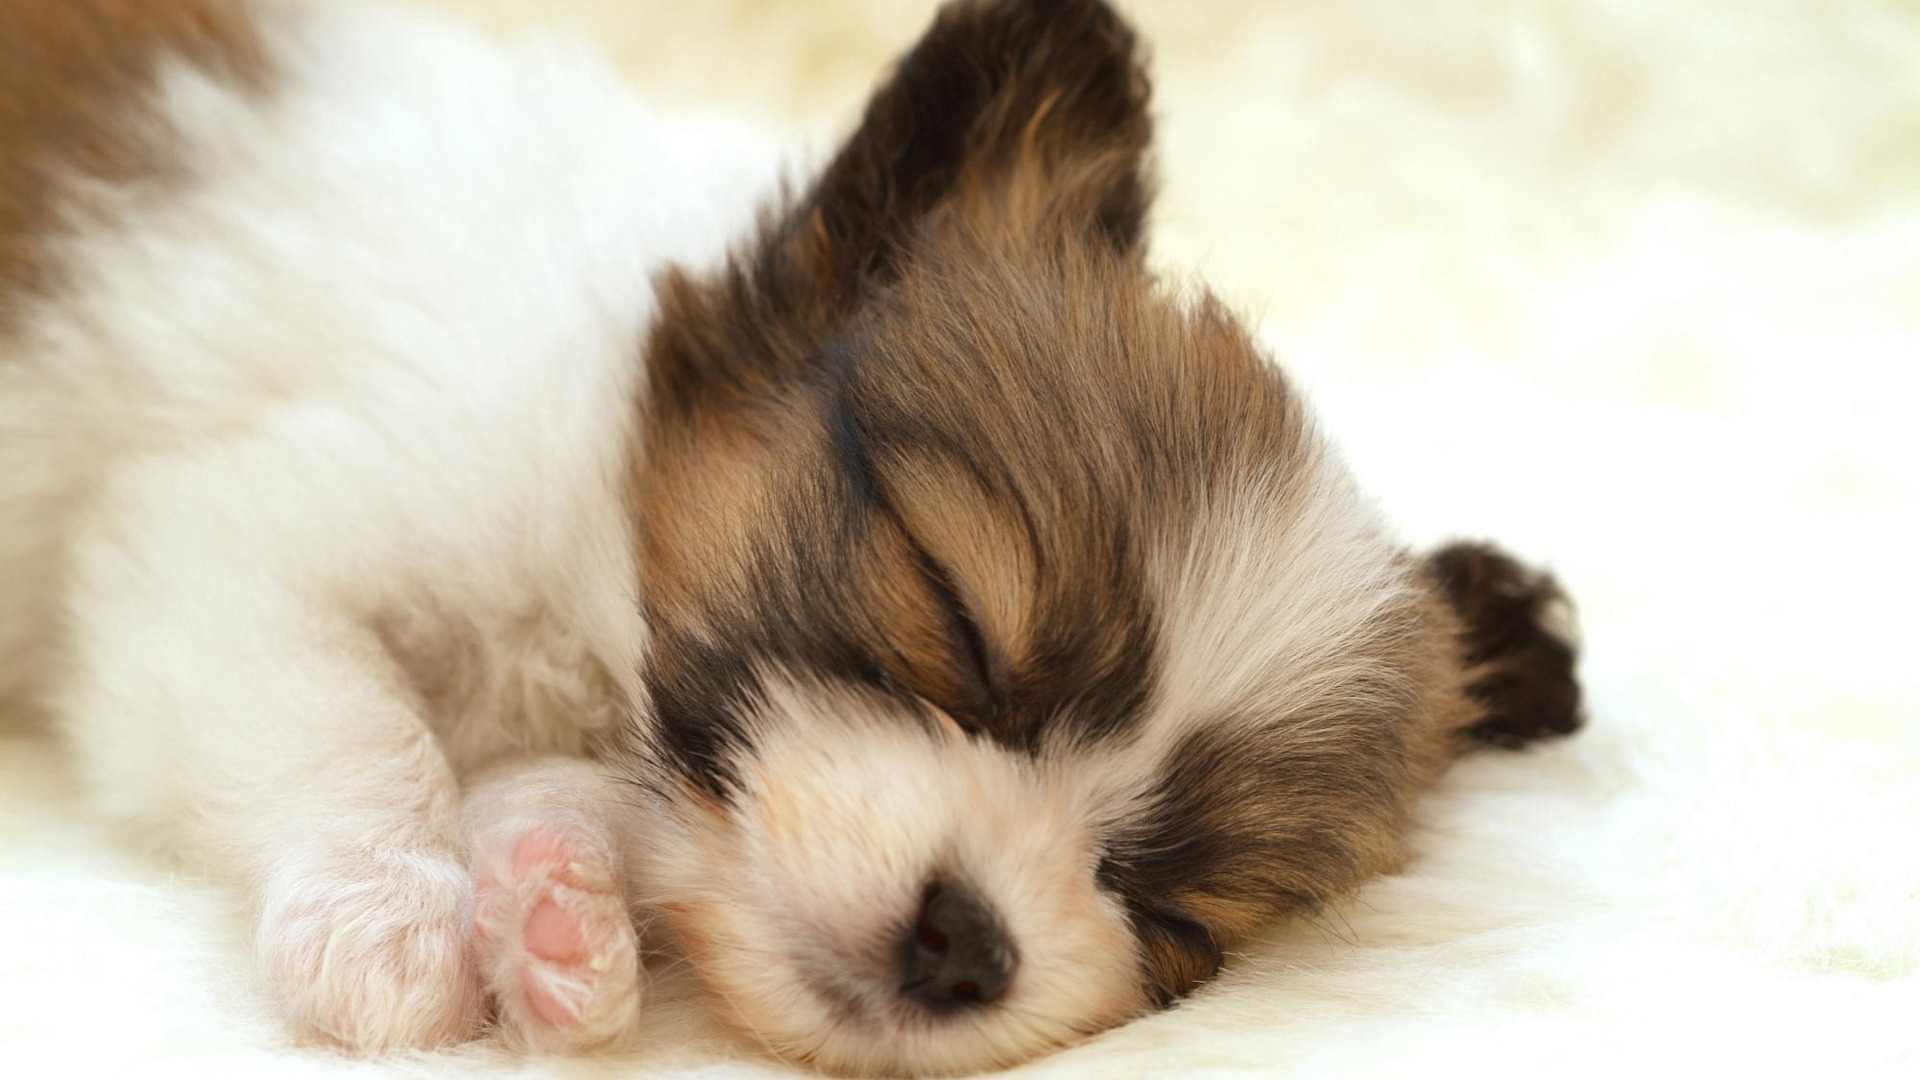 Puppy Photo HD wallpapers (10) #10 - 1920x1080